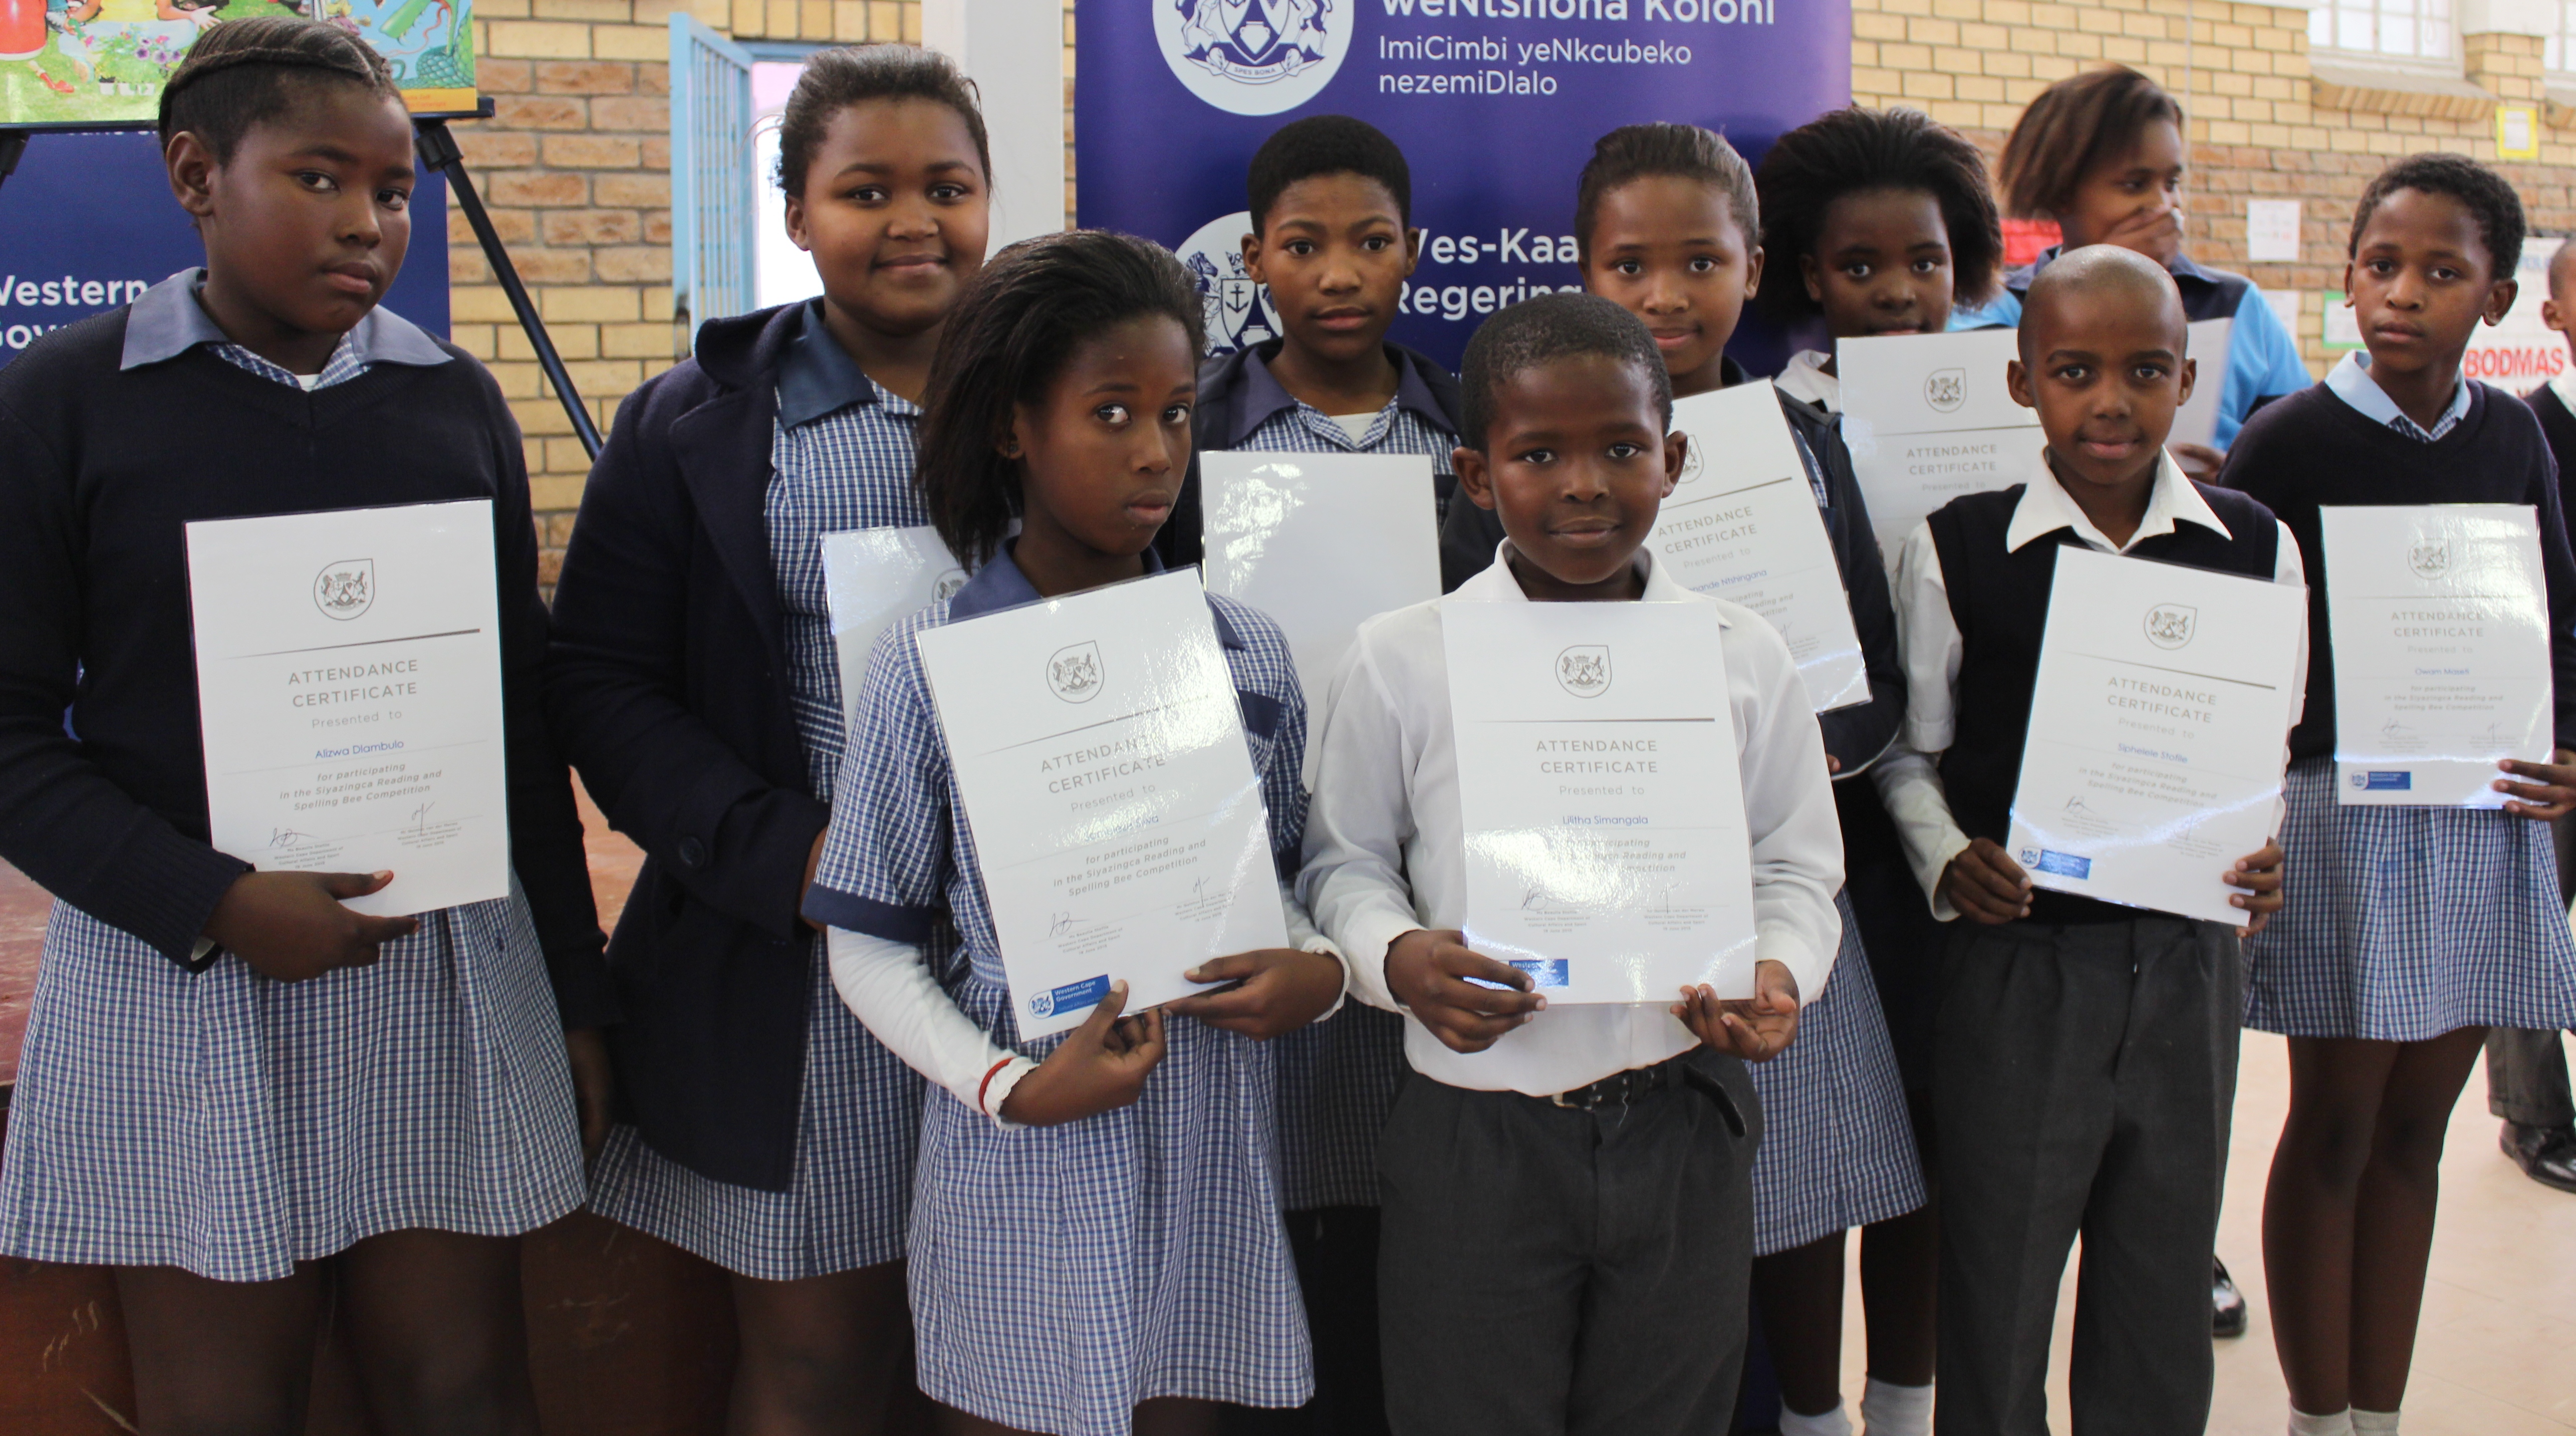 Participants from St Michaels Primary School in Khayelitsha.